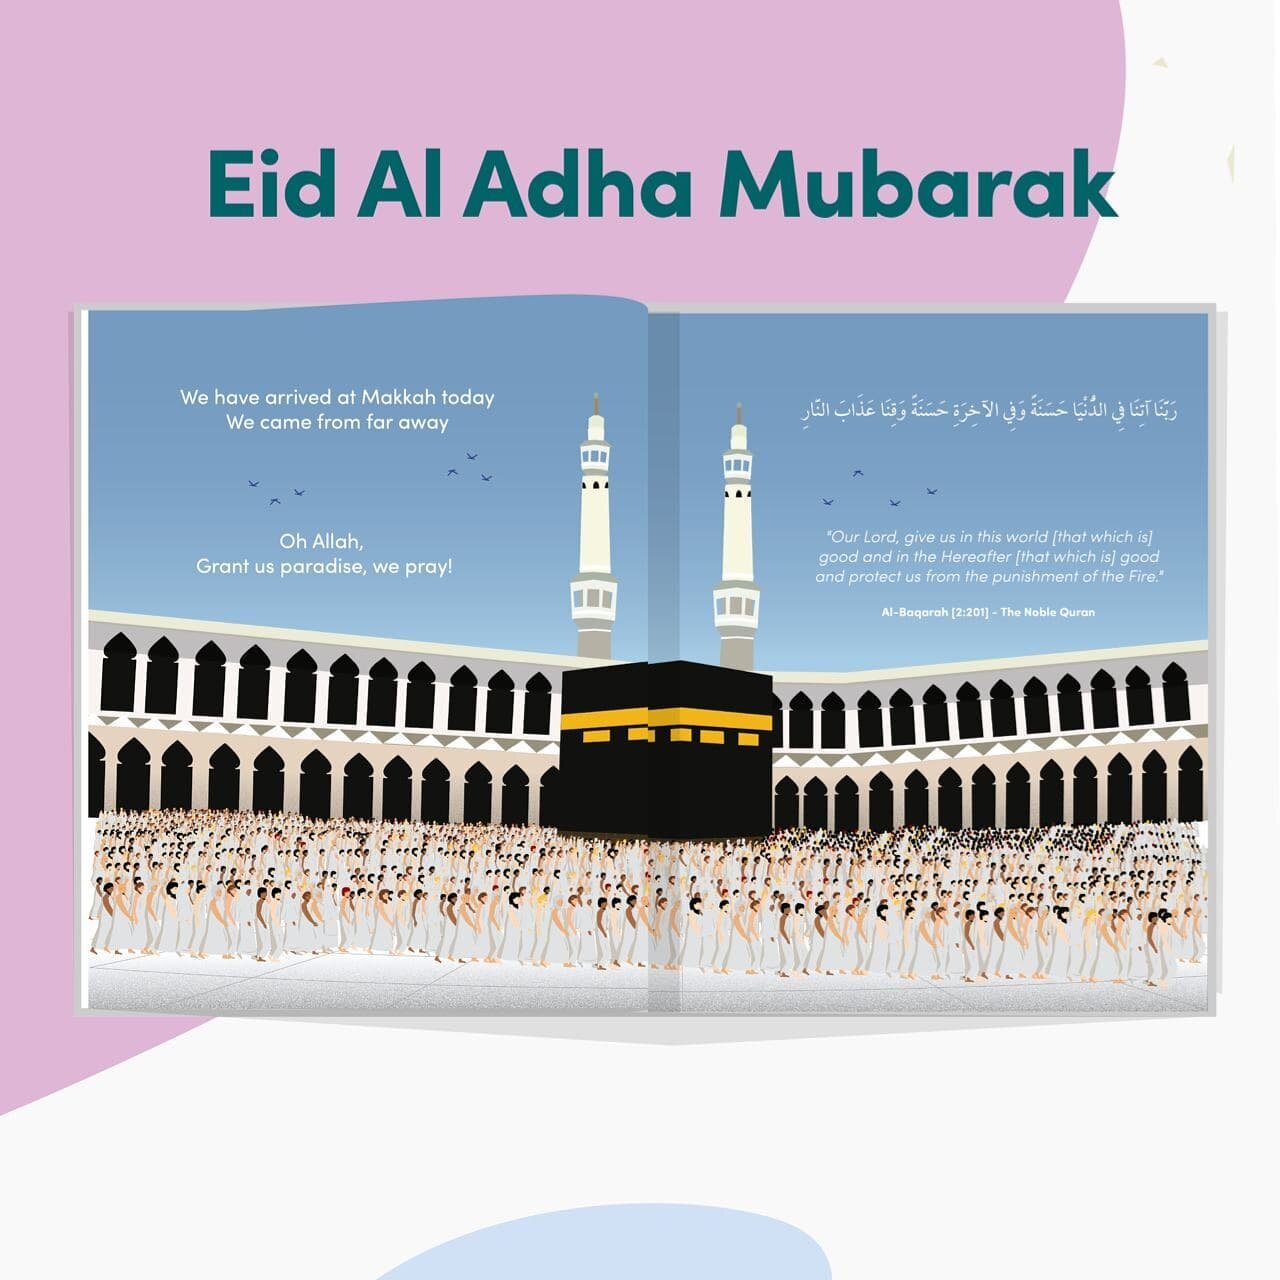 May Allah shower Rahmah upon us and accept our deeds and sacrifice. 

Eid al Adha Mubarak everyone! 

*picture from We are going to Makkah! Book.

#oliekbooks
#islamicchildrenbook
#islamicbook
#islamicbooksforchildren
#islamicbooksforkids
#muslimpare